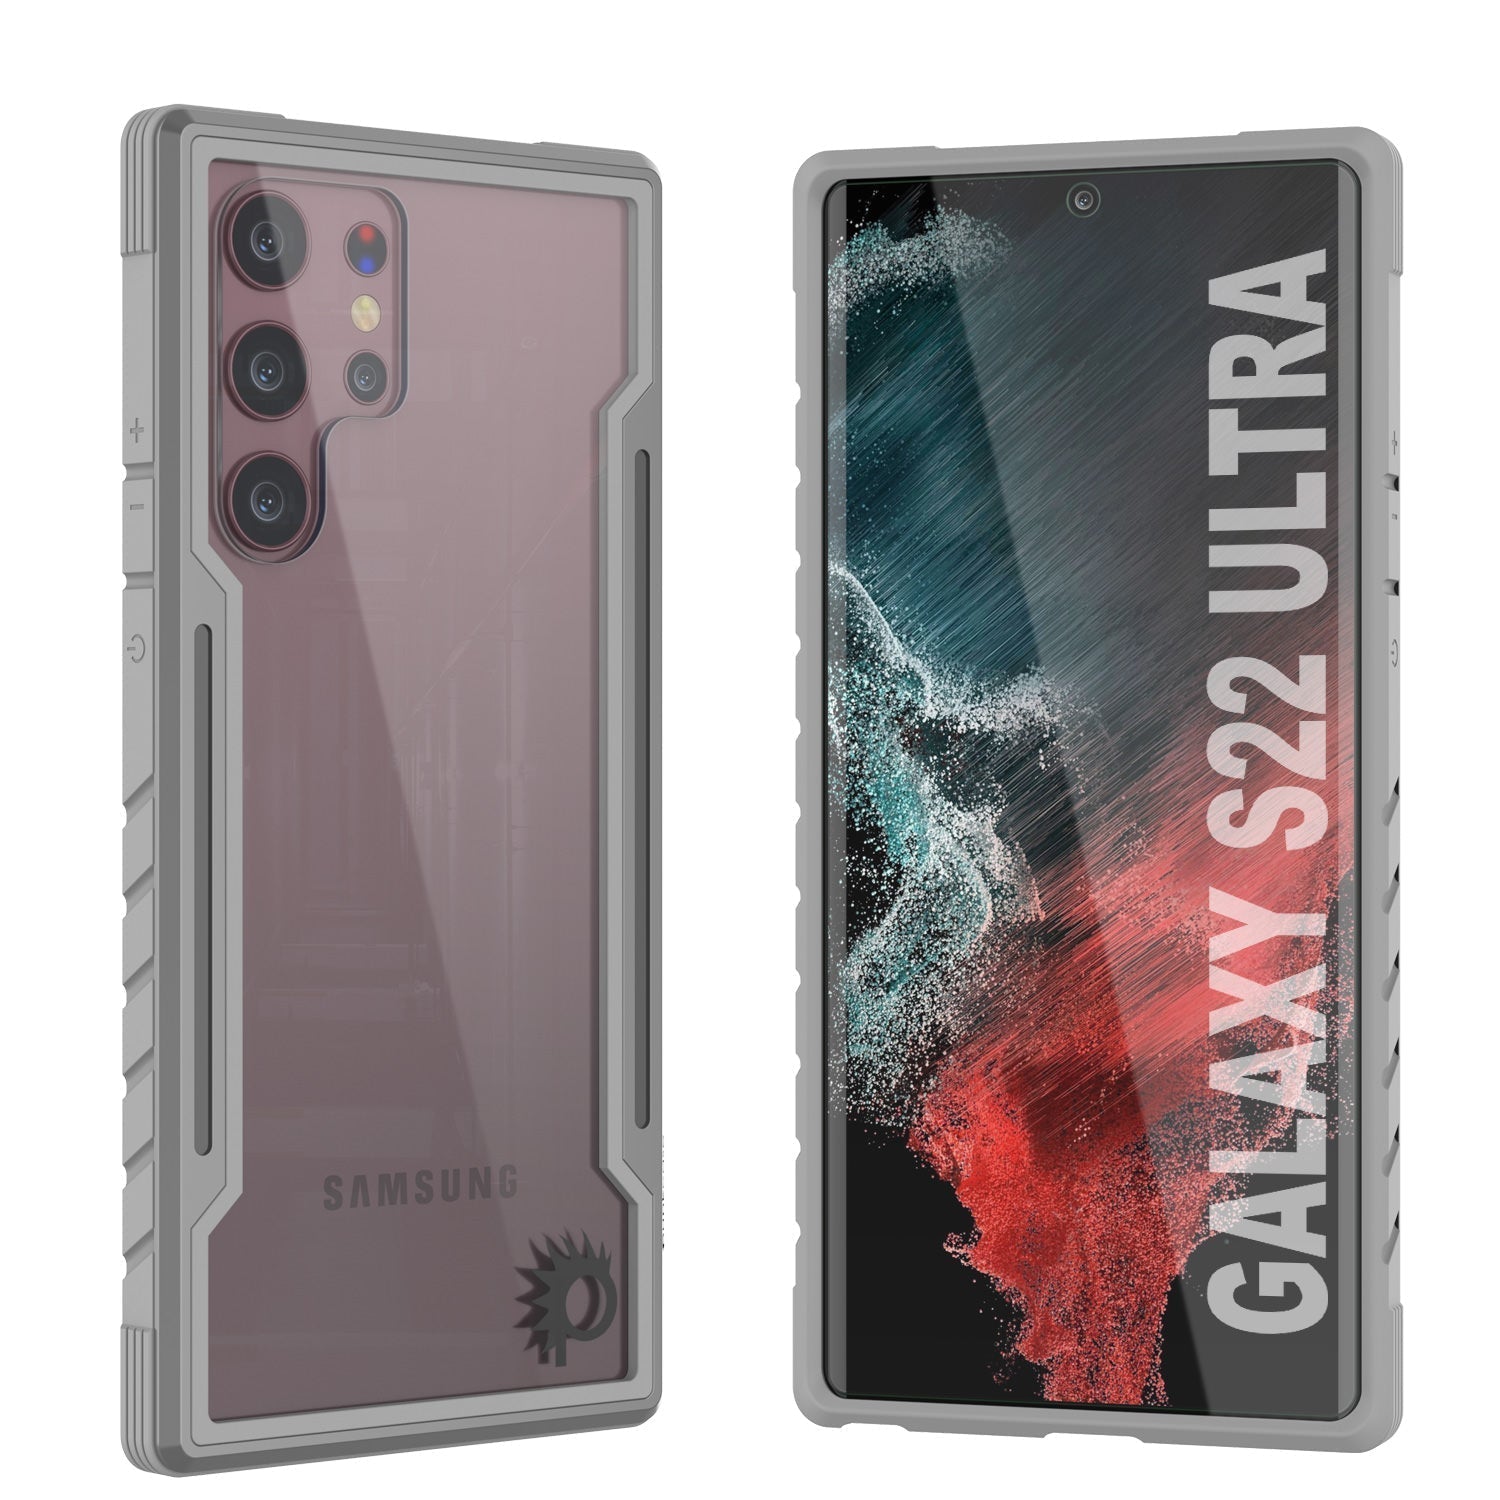 Punkcase S22 Ultra ravenger Case Protective Military Grade Multilayer Cover [Grey]